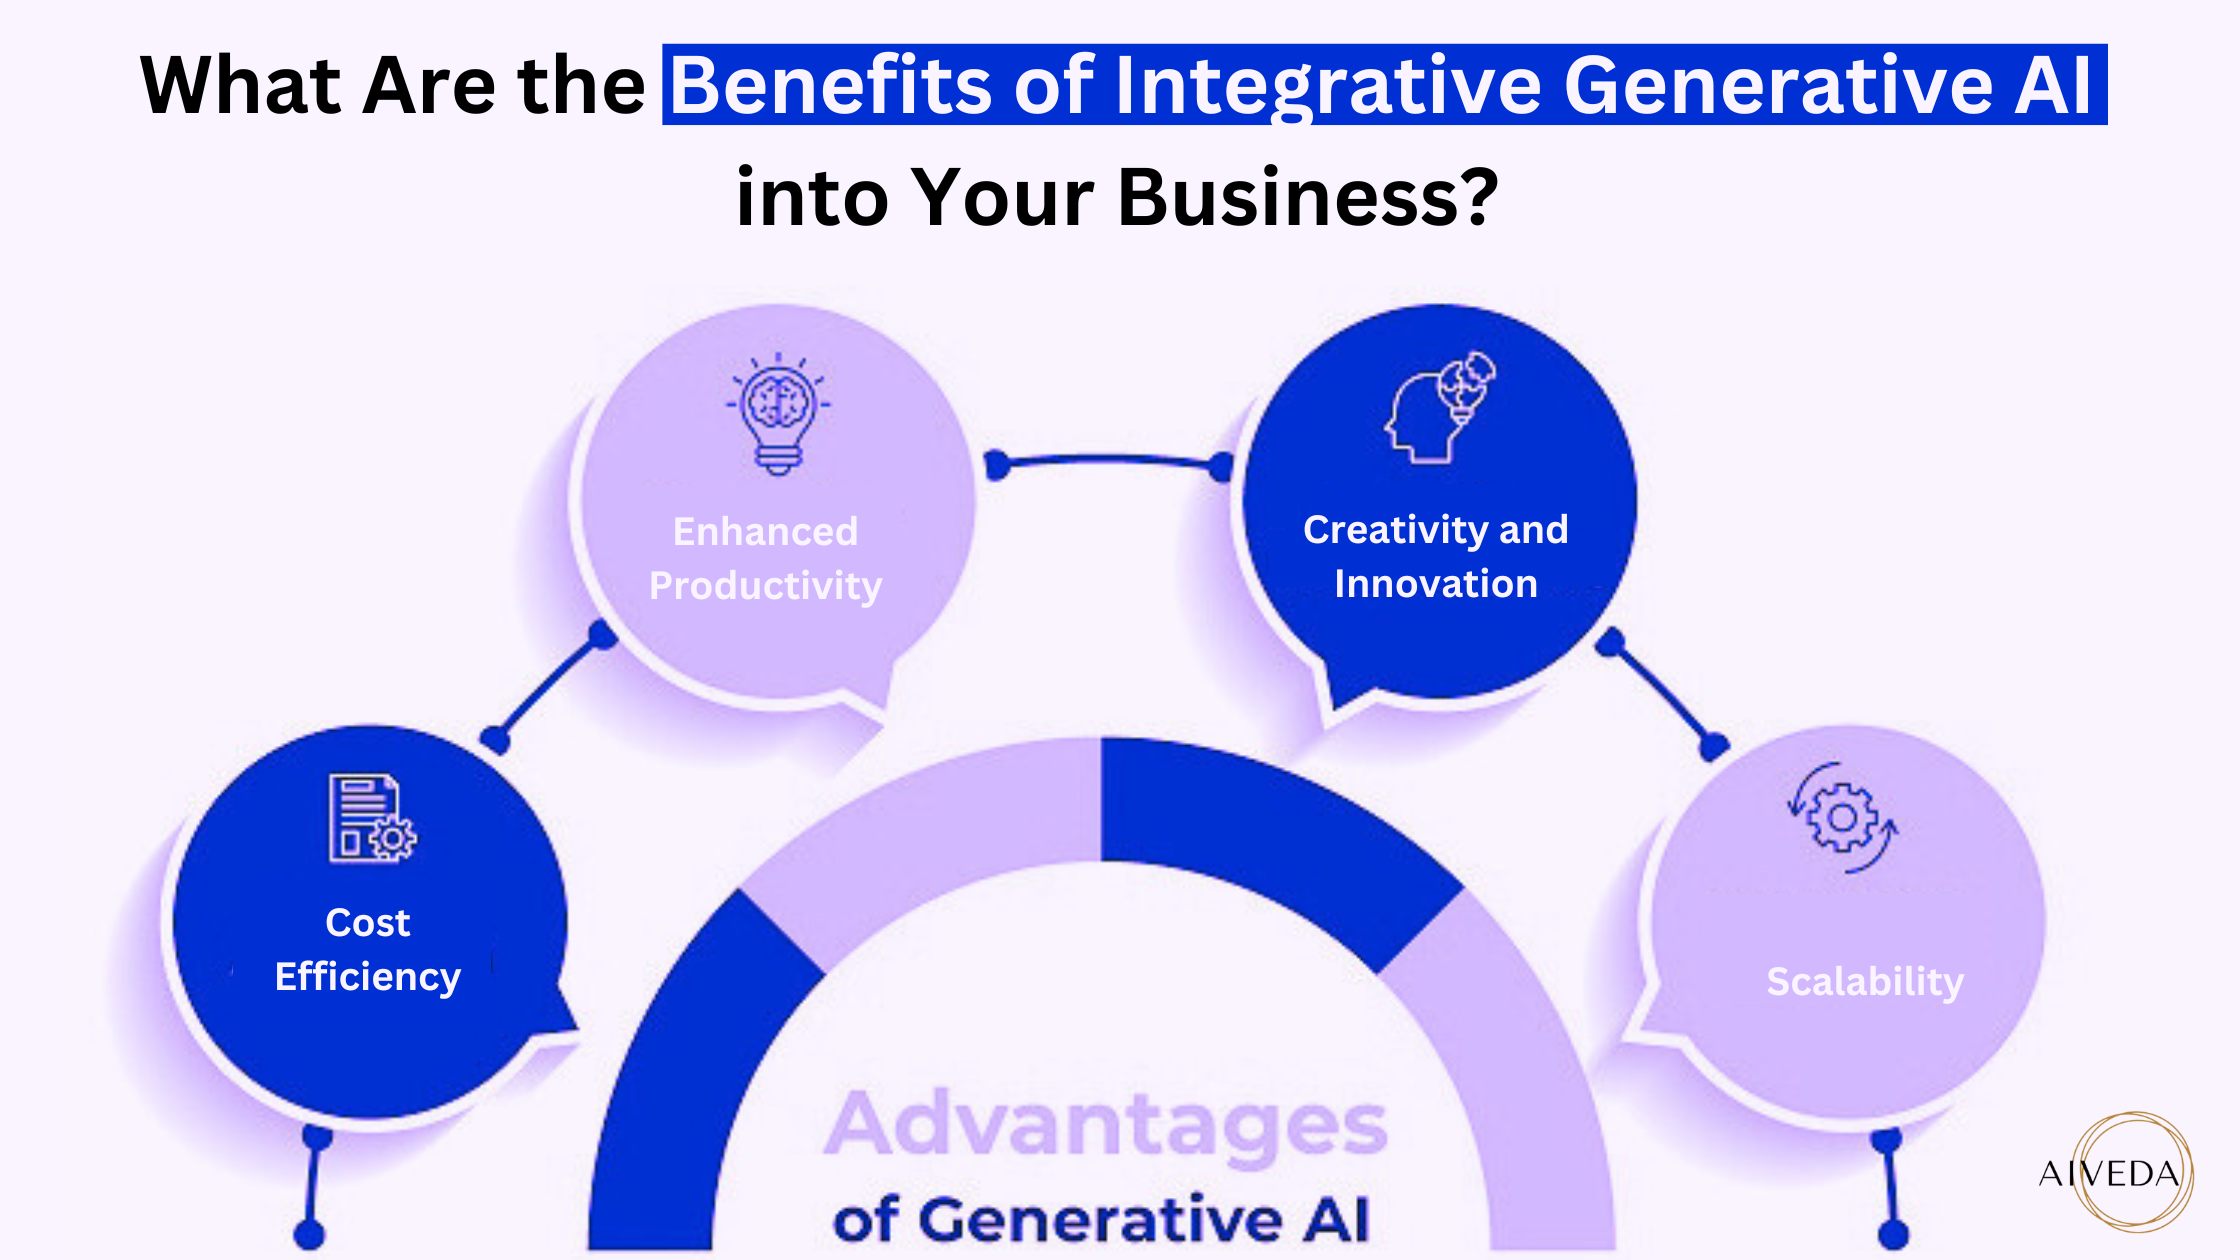 What Are the Benefits of Integrative Generative AI into Your Business?